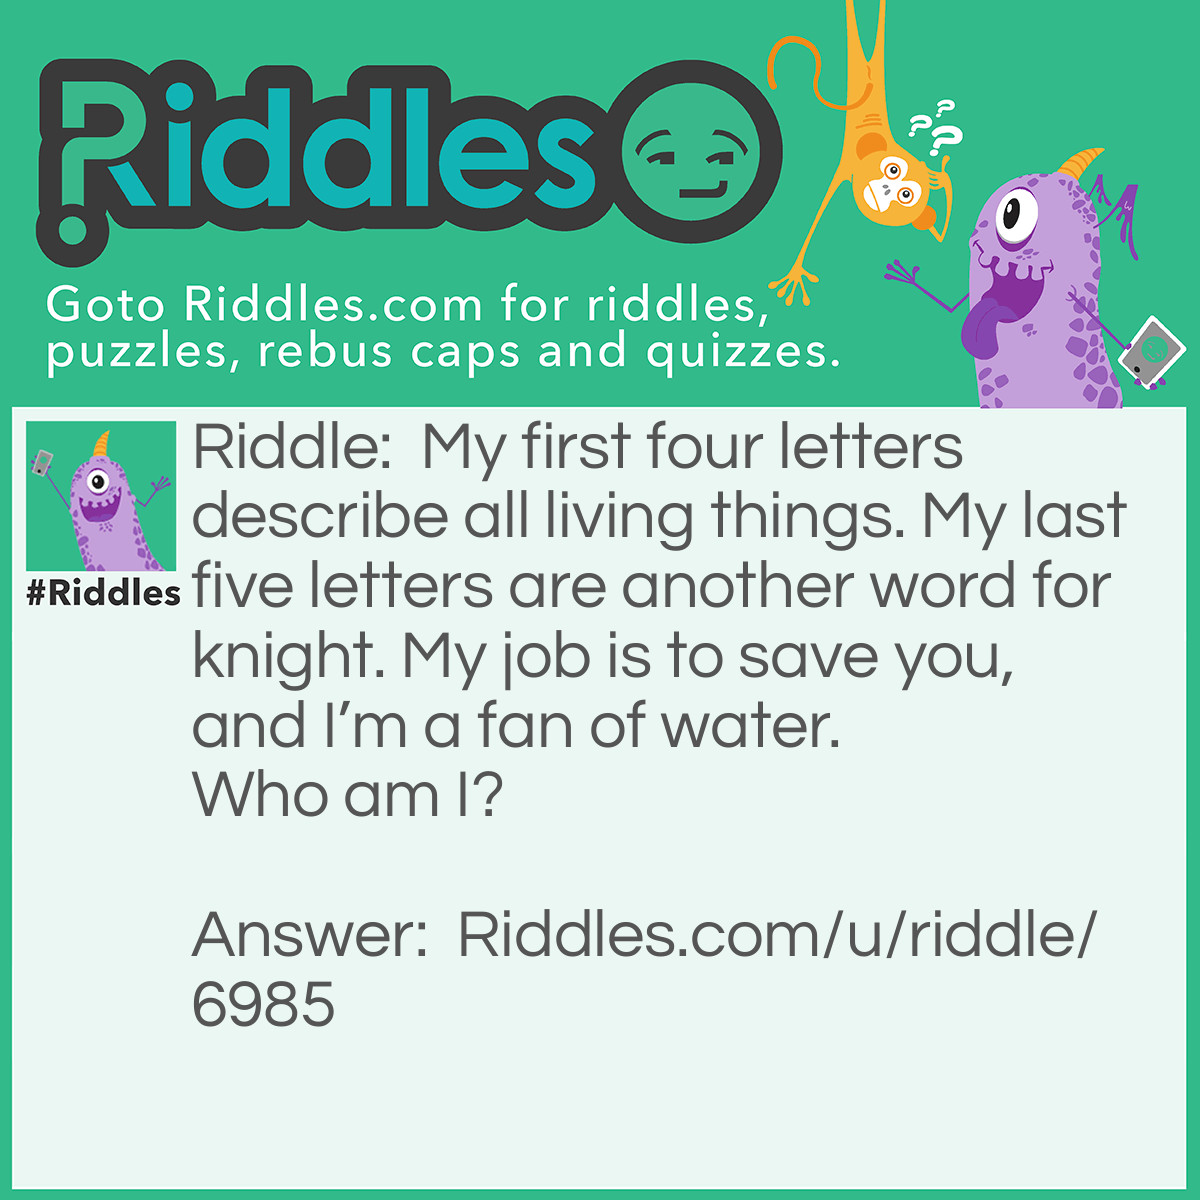 Riddle: My first four letters describe all living things. My last five letters are another word for knight. My job is to save you, and I'm a fan of water. Who am I? Answer: I’m a lifeguard